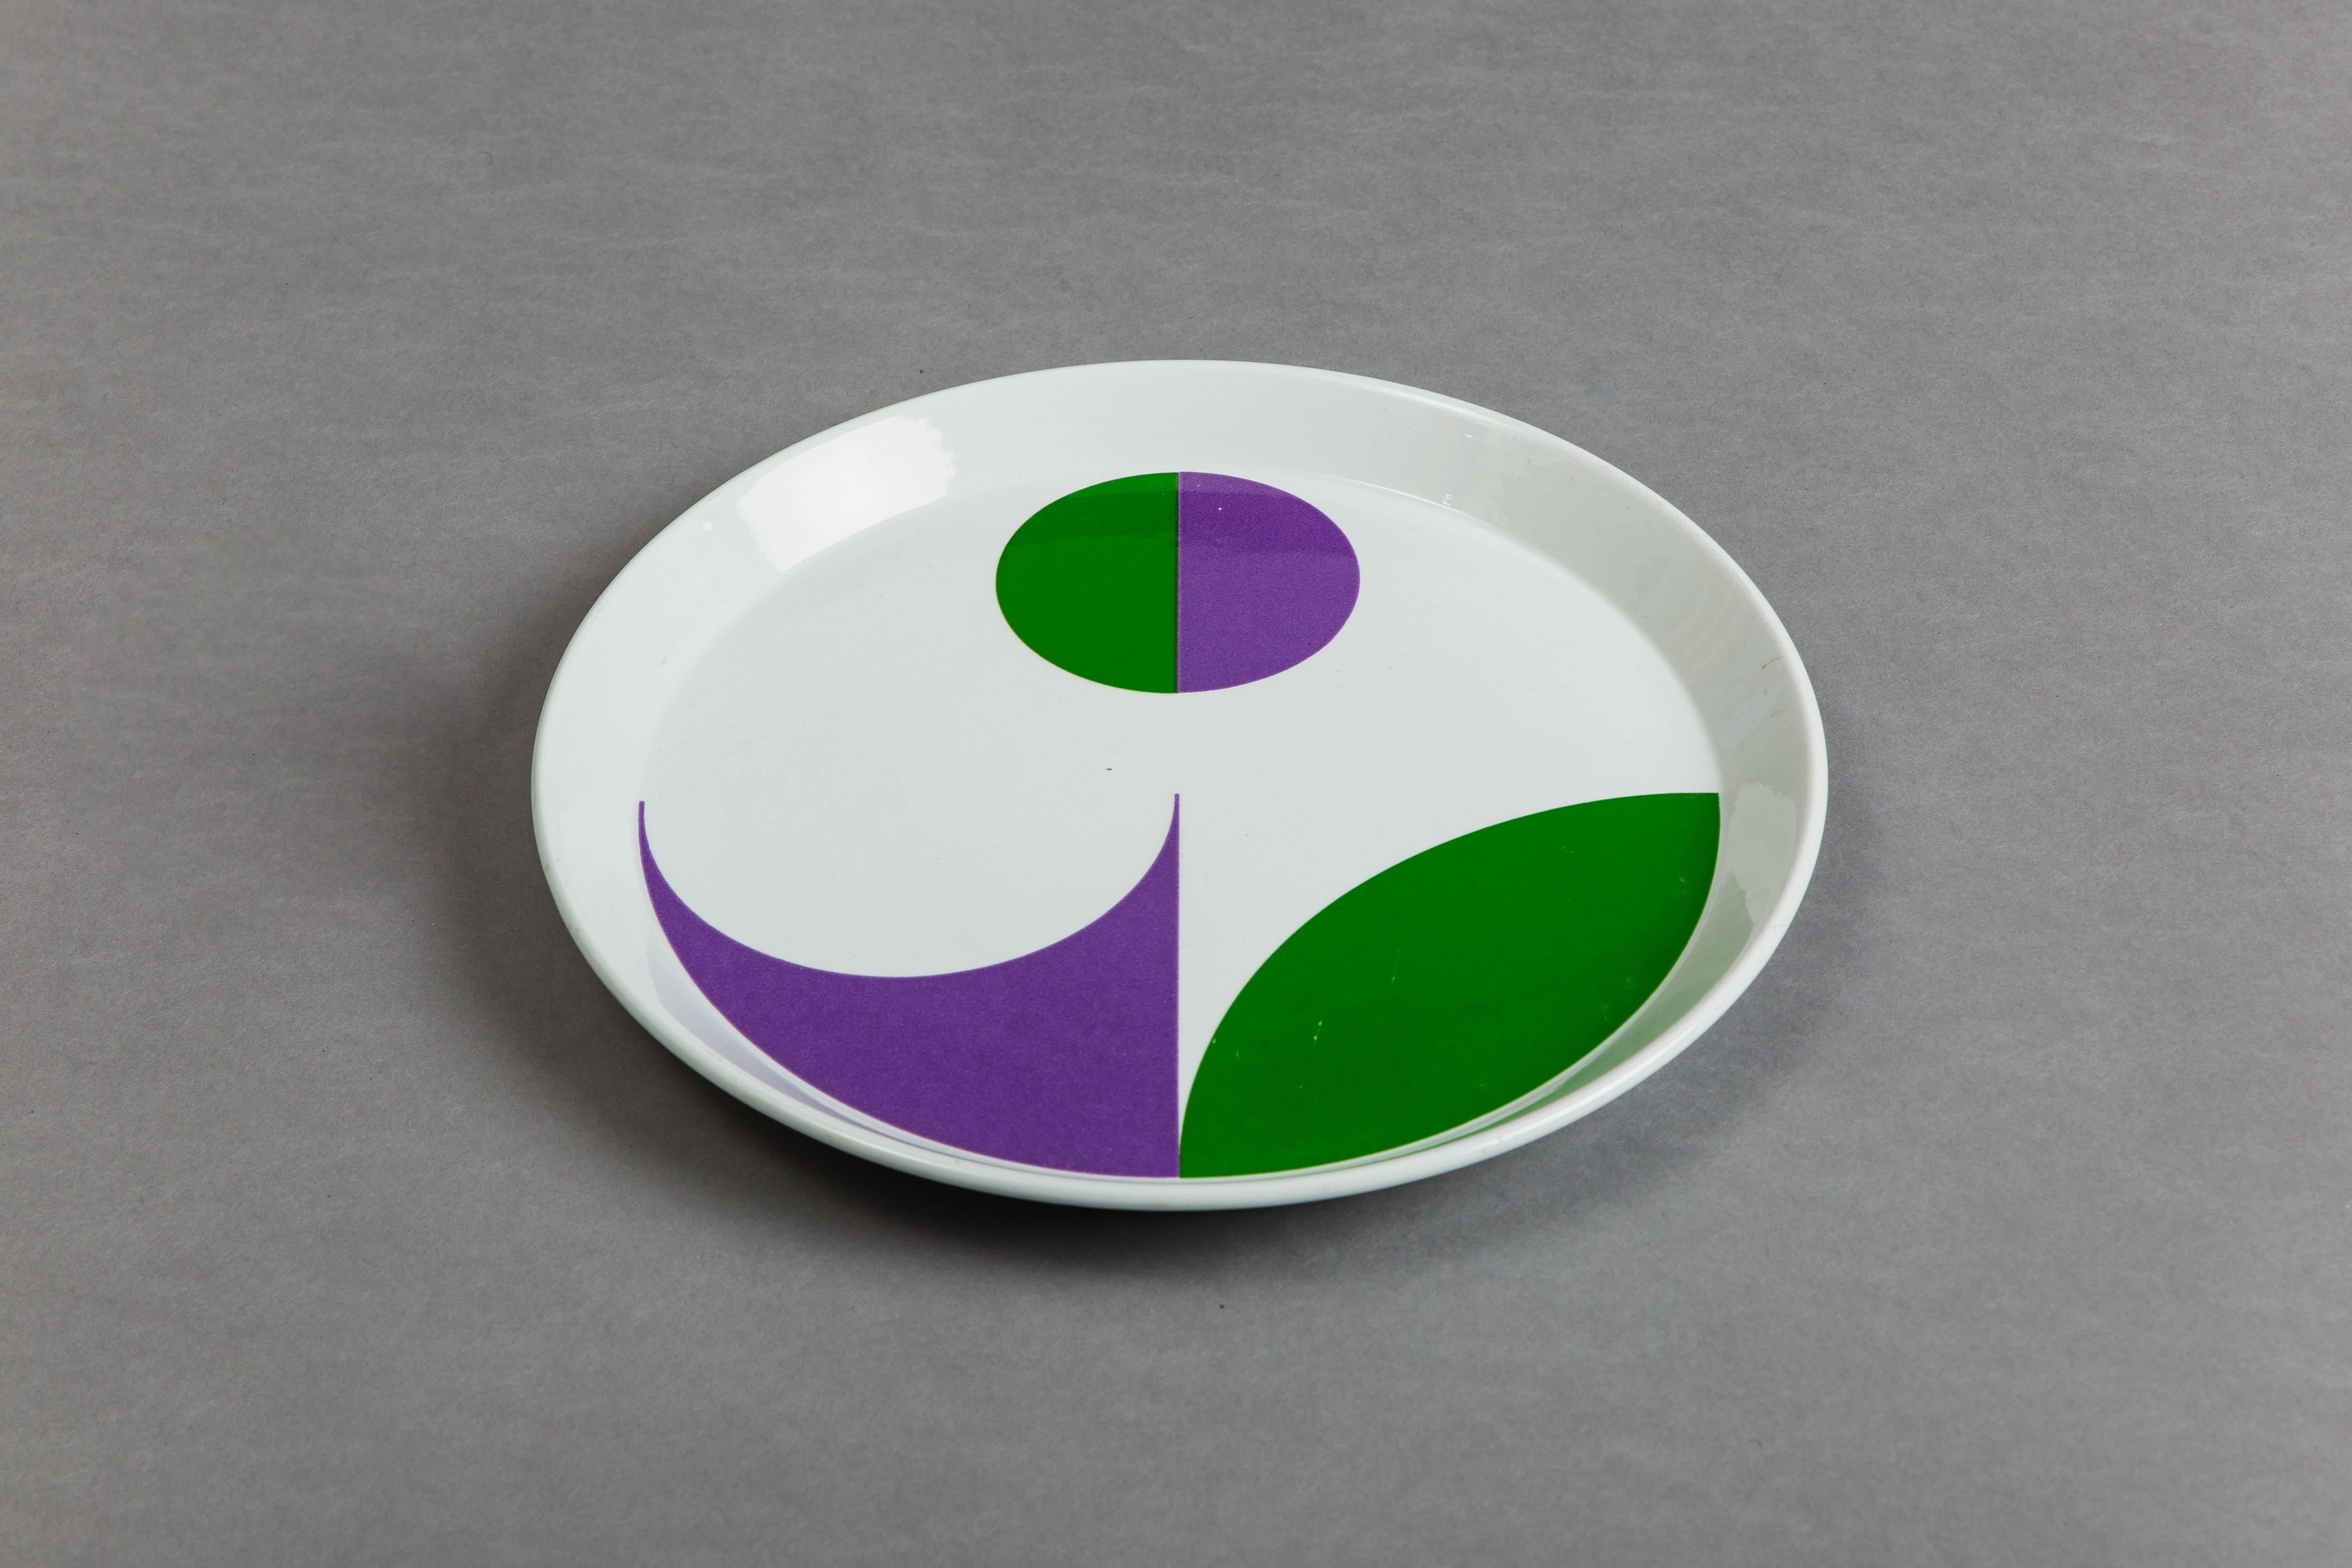 Gio Ponti for Ceramica Franco Pozzi glazed porcelain plates, Italy, circa 1967. Single earlier plate with simple element and later three plates with complex elements deriving from the intersection of circles in positive and negative. Signed with